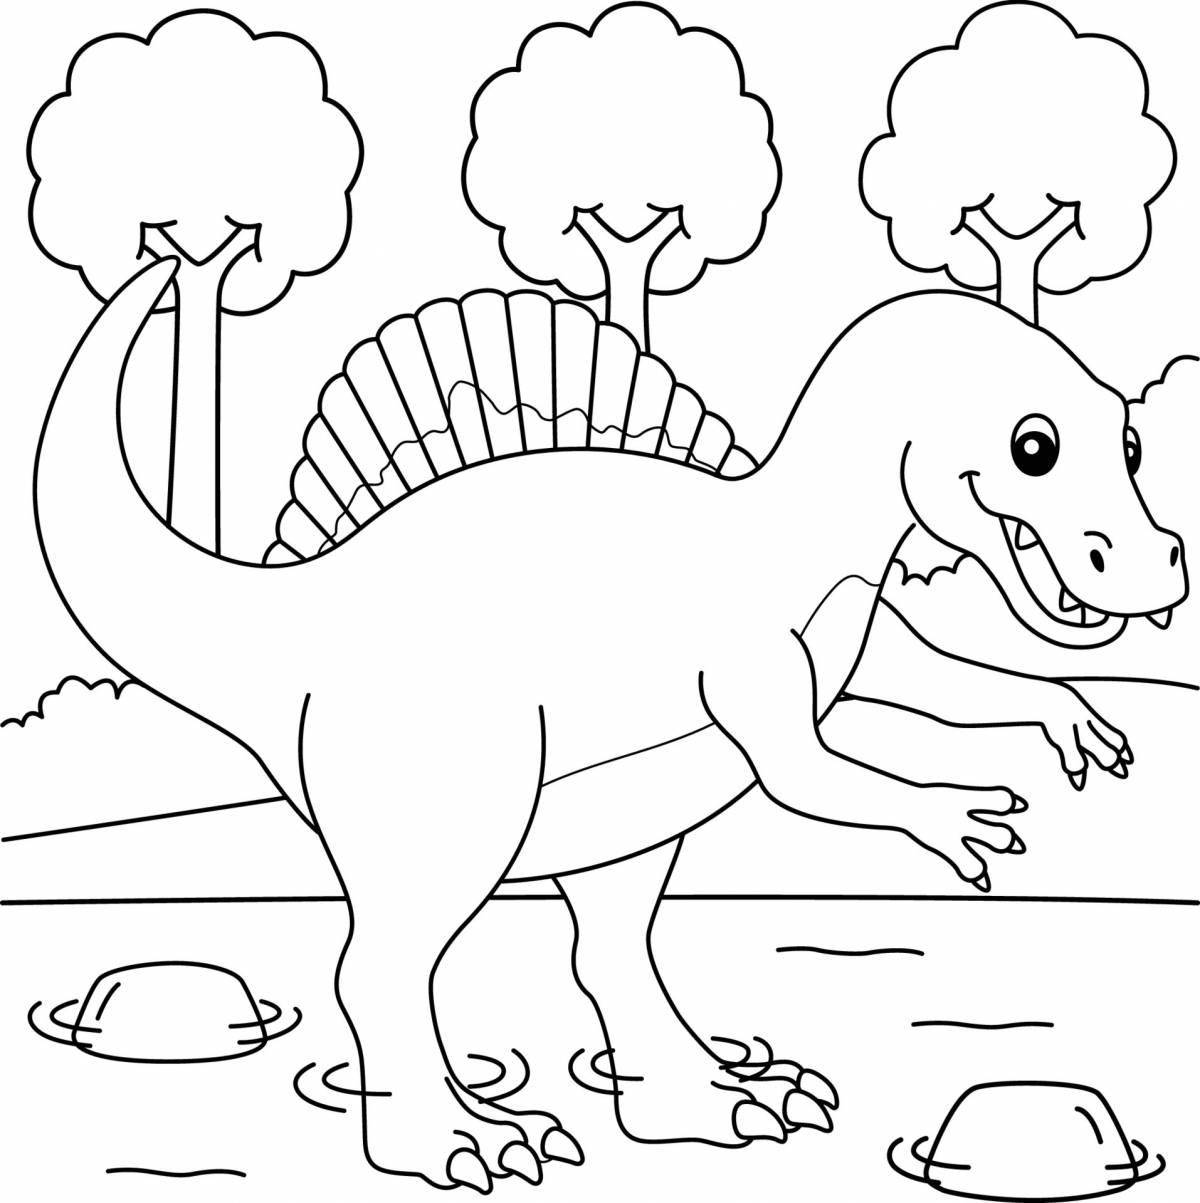 Majestic spinosaurus coloring page